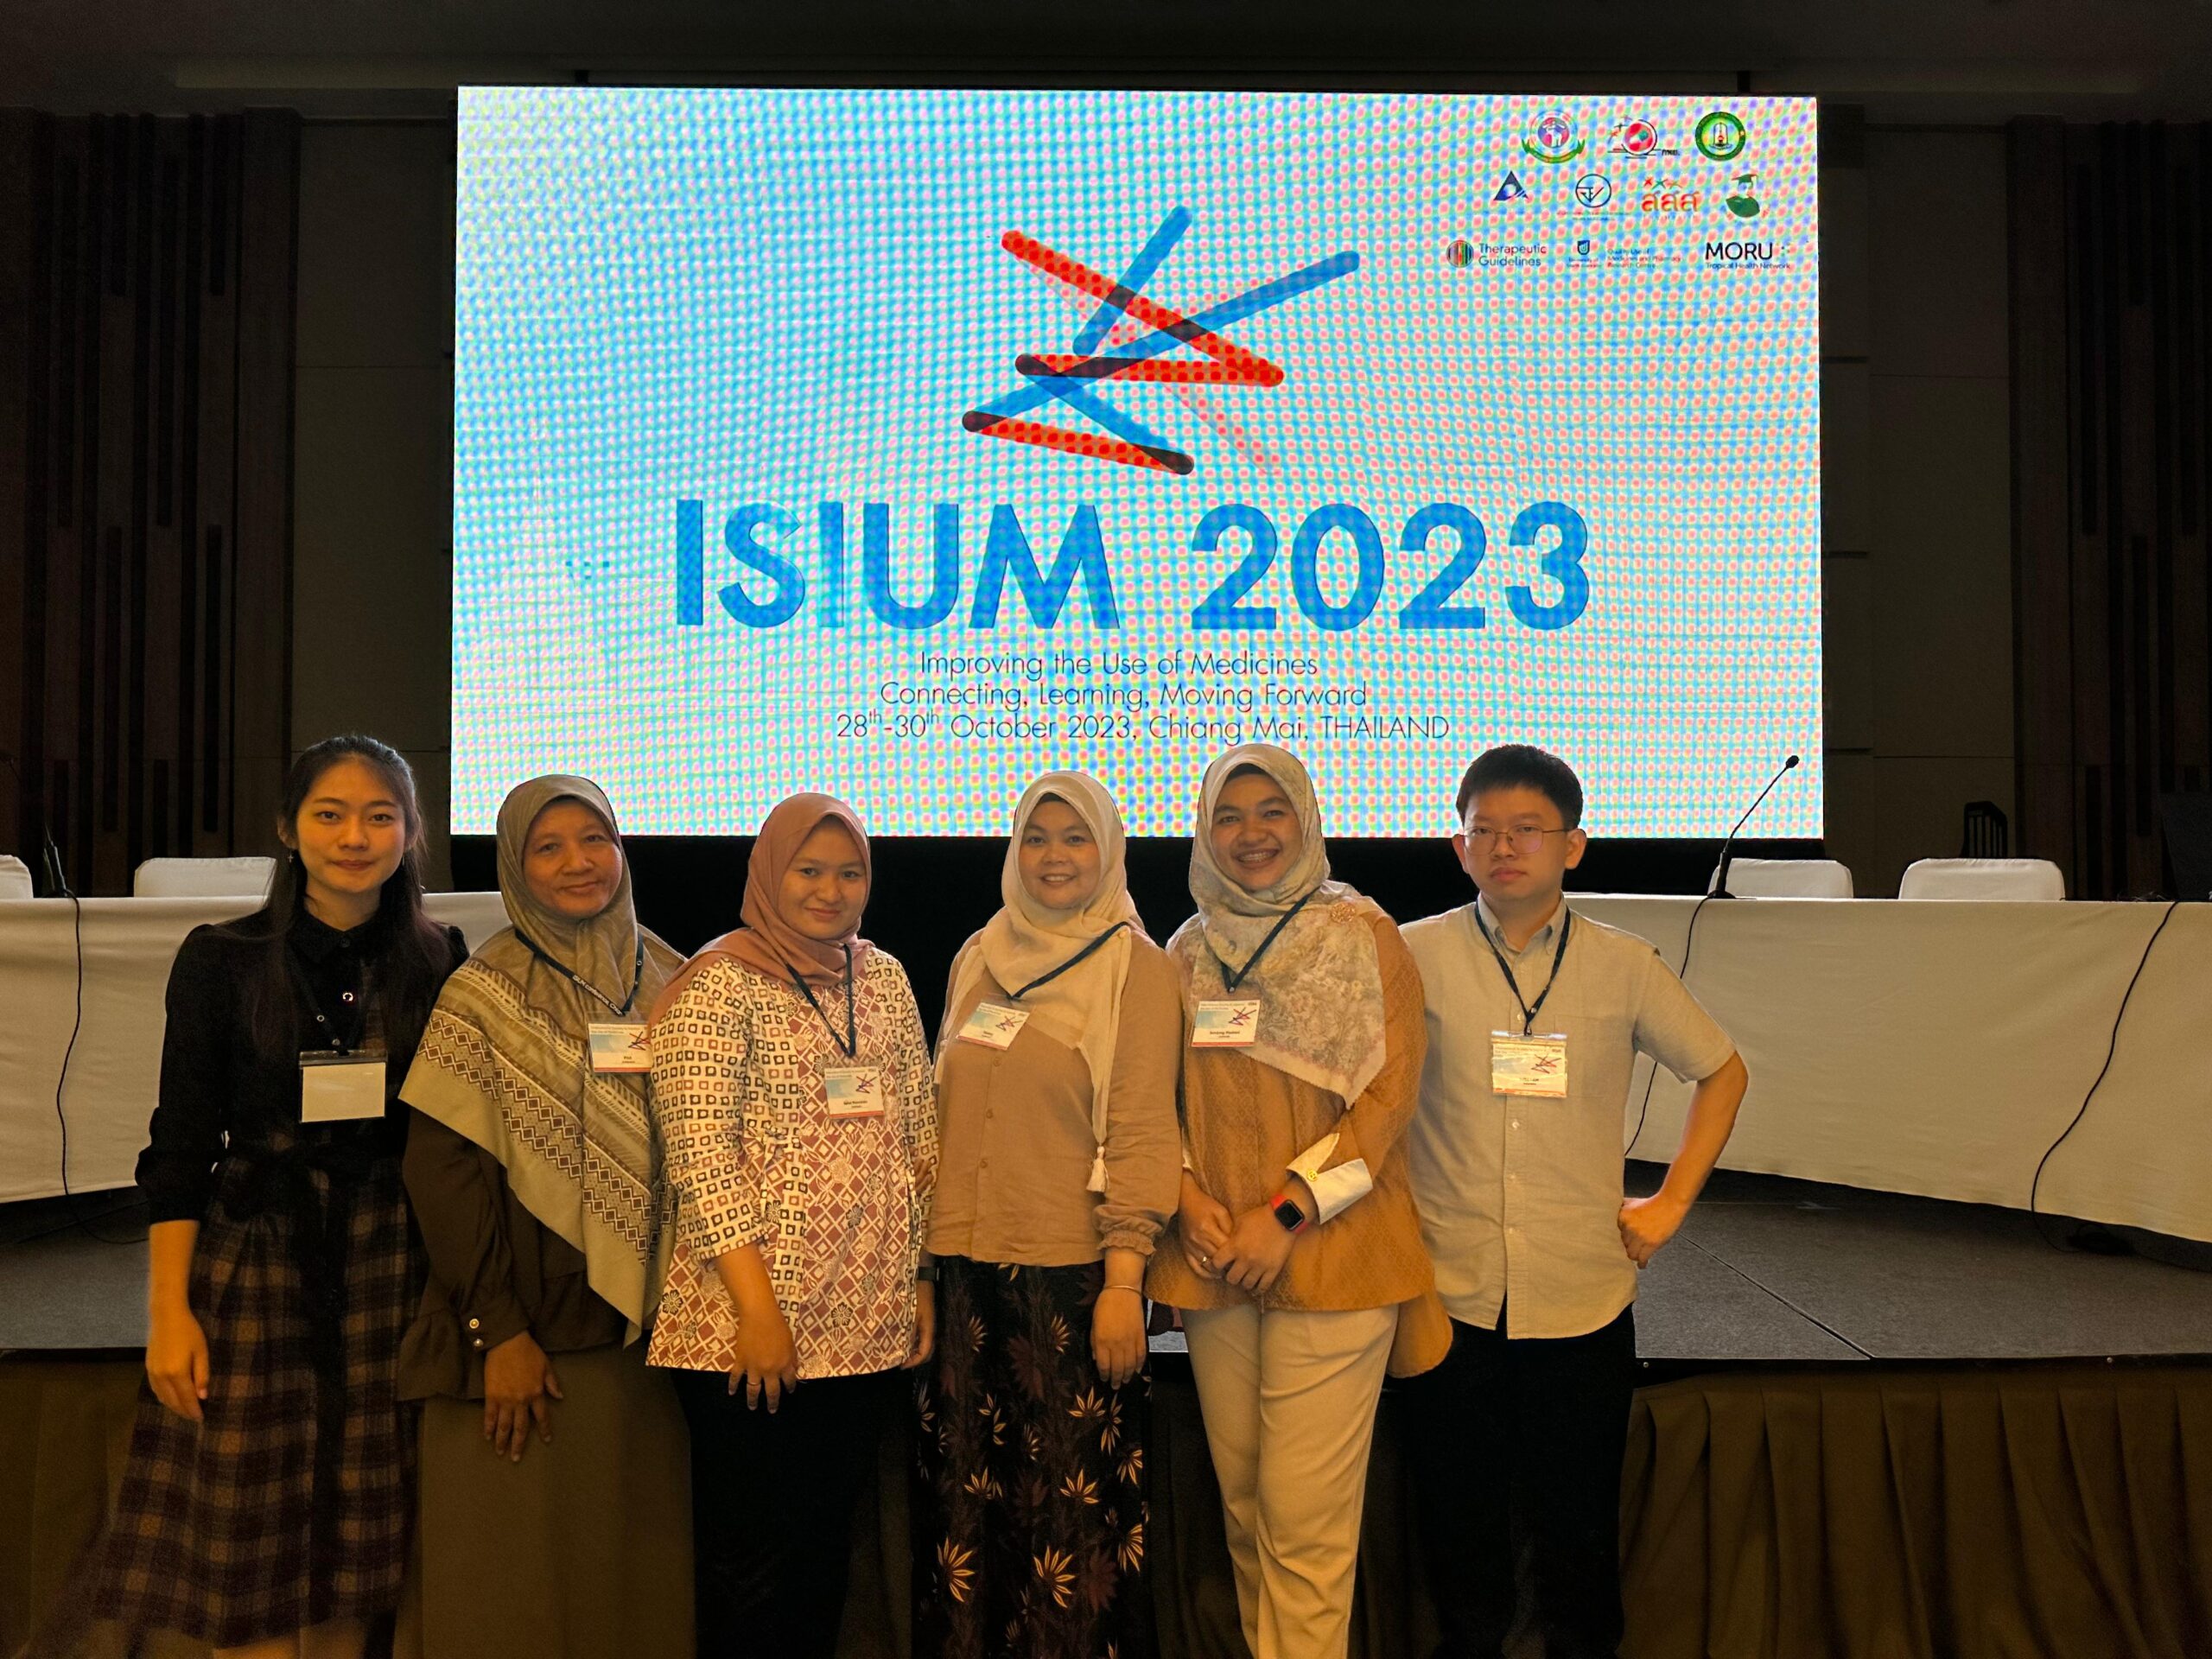 The recent conference attended: International Society to Improve the Use of Medicines (ISIUM) Conference, Chiang Mai